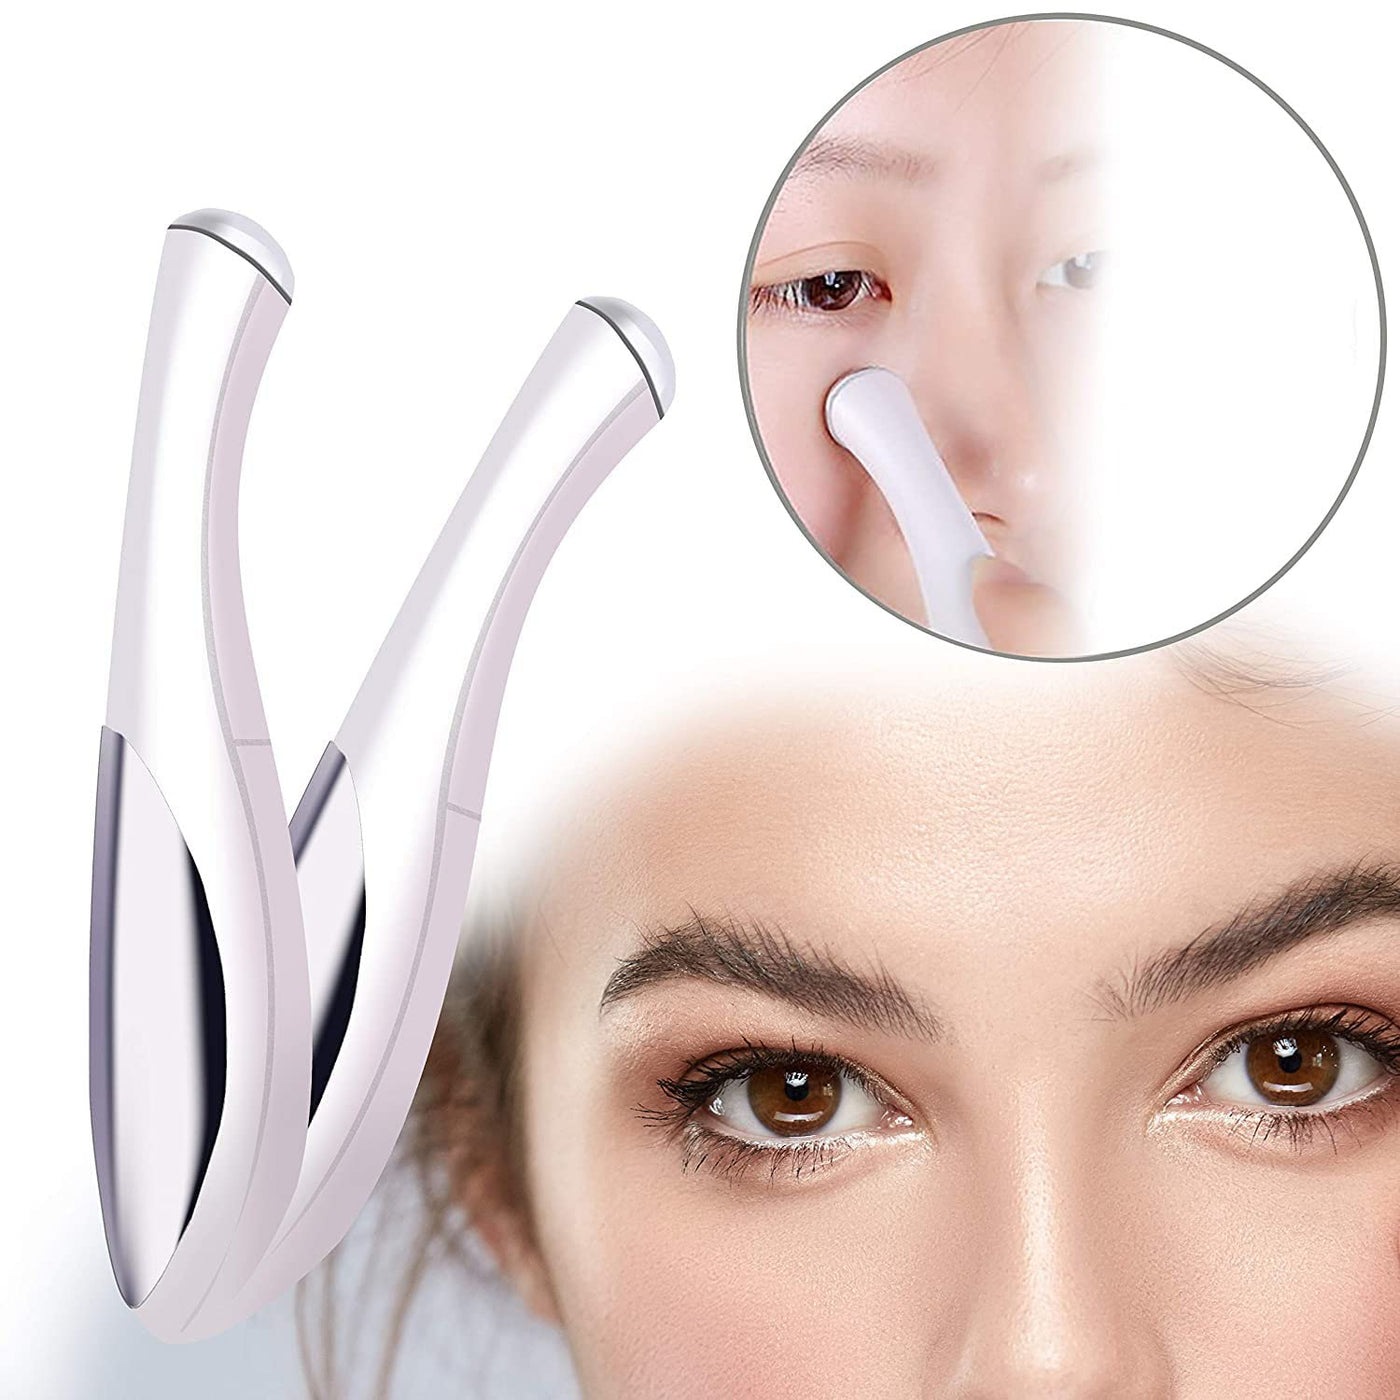 Swiss Botany Beauty 1 / 1 Ionic Wrinkle Therapy Wand High Frequency Skin Tightening Wrinkle Reducing Dark Circle Puffy Eye Treatment allows skin serums 30% deeper penetration